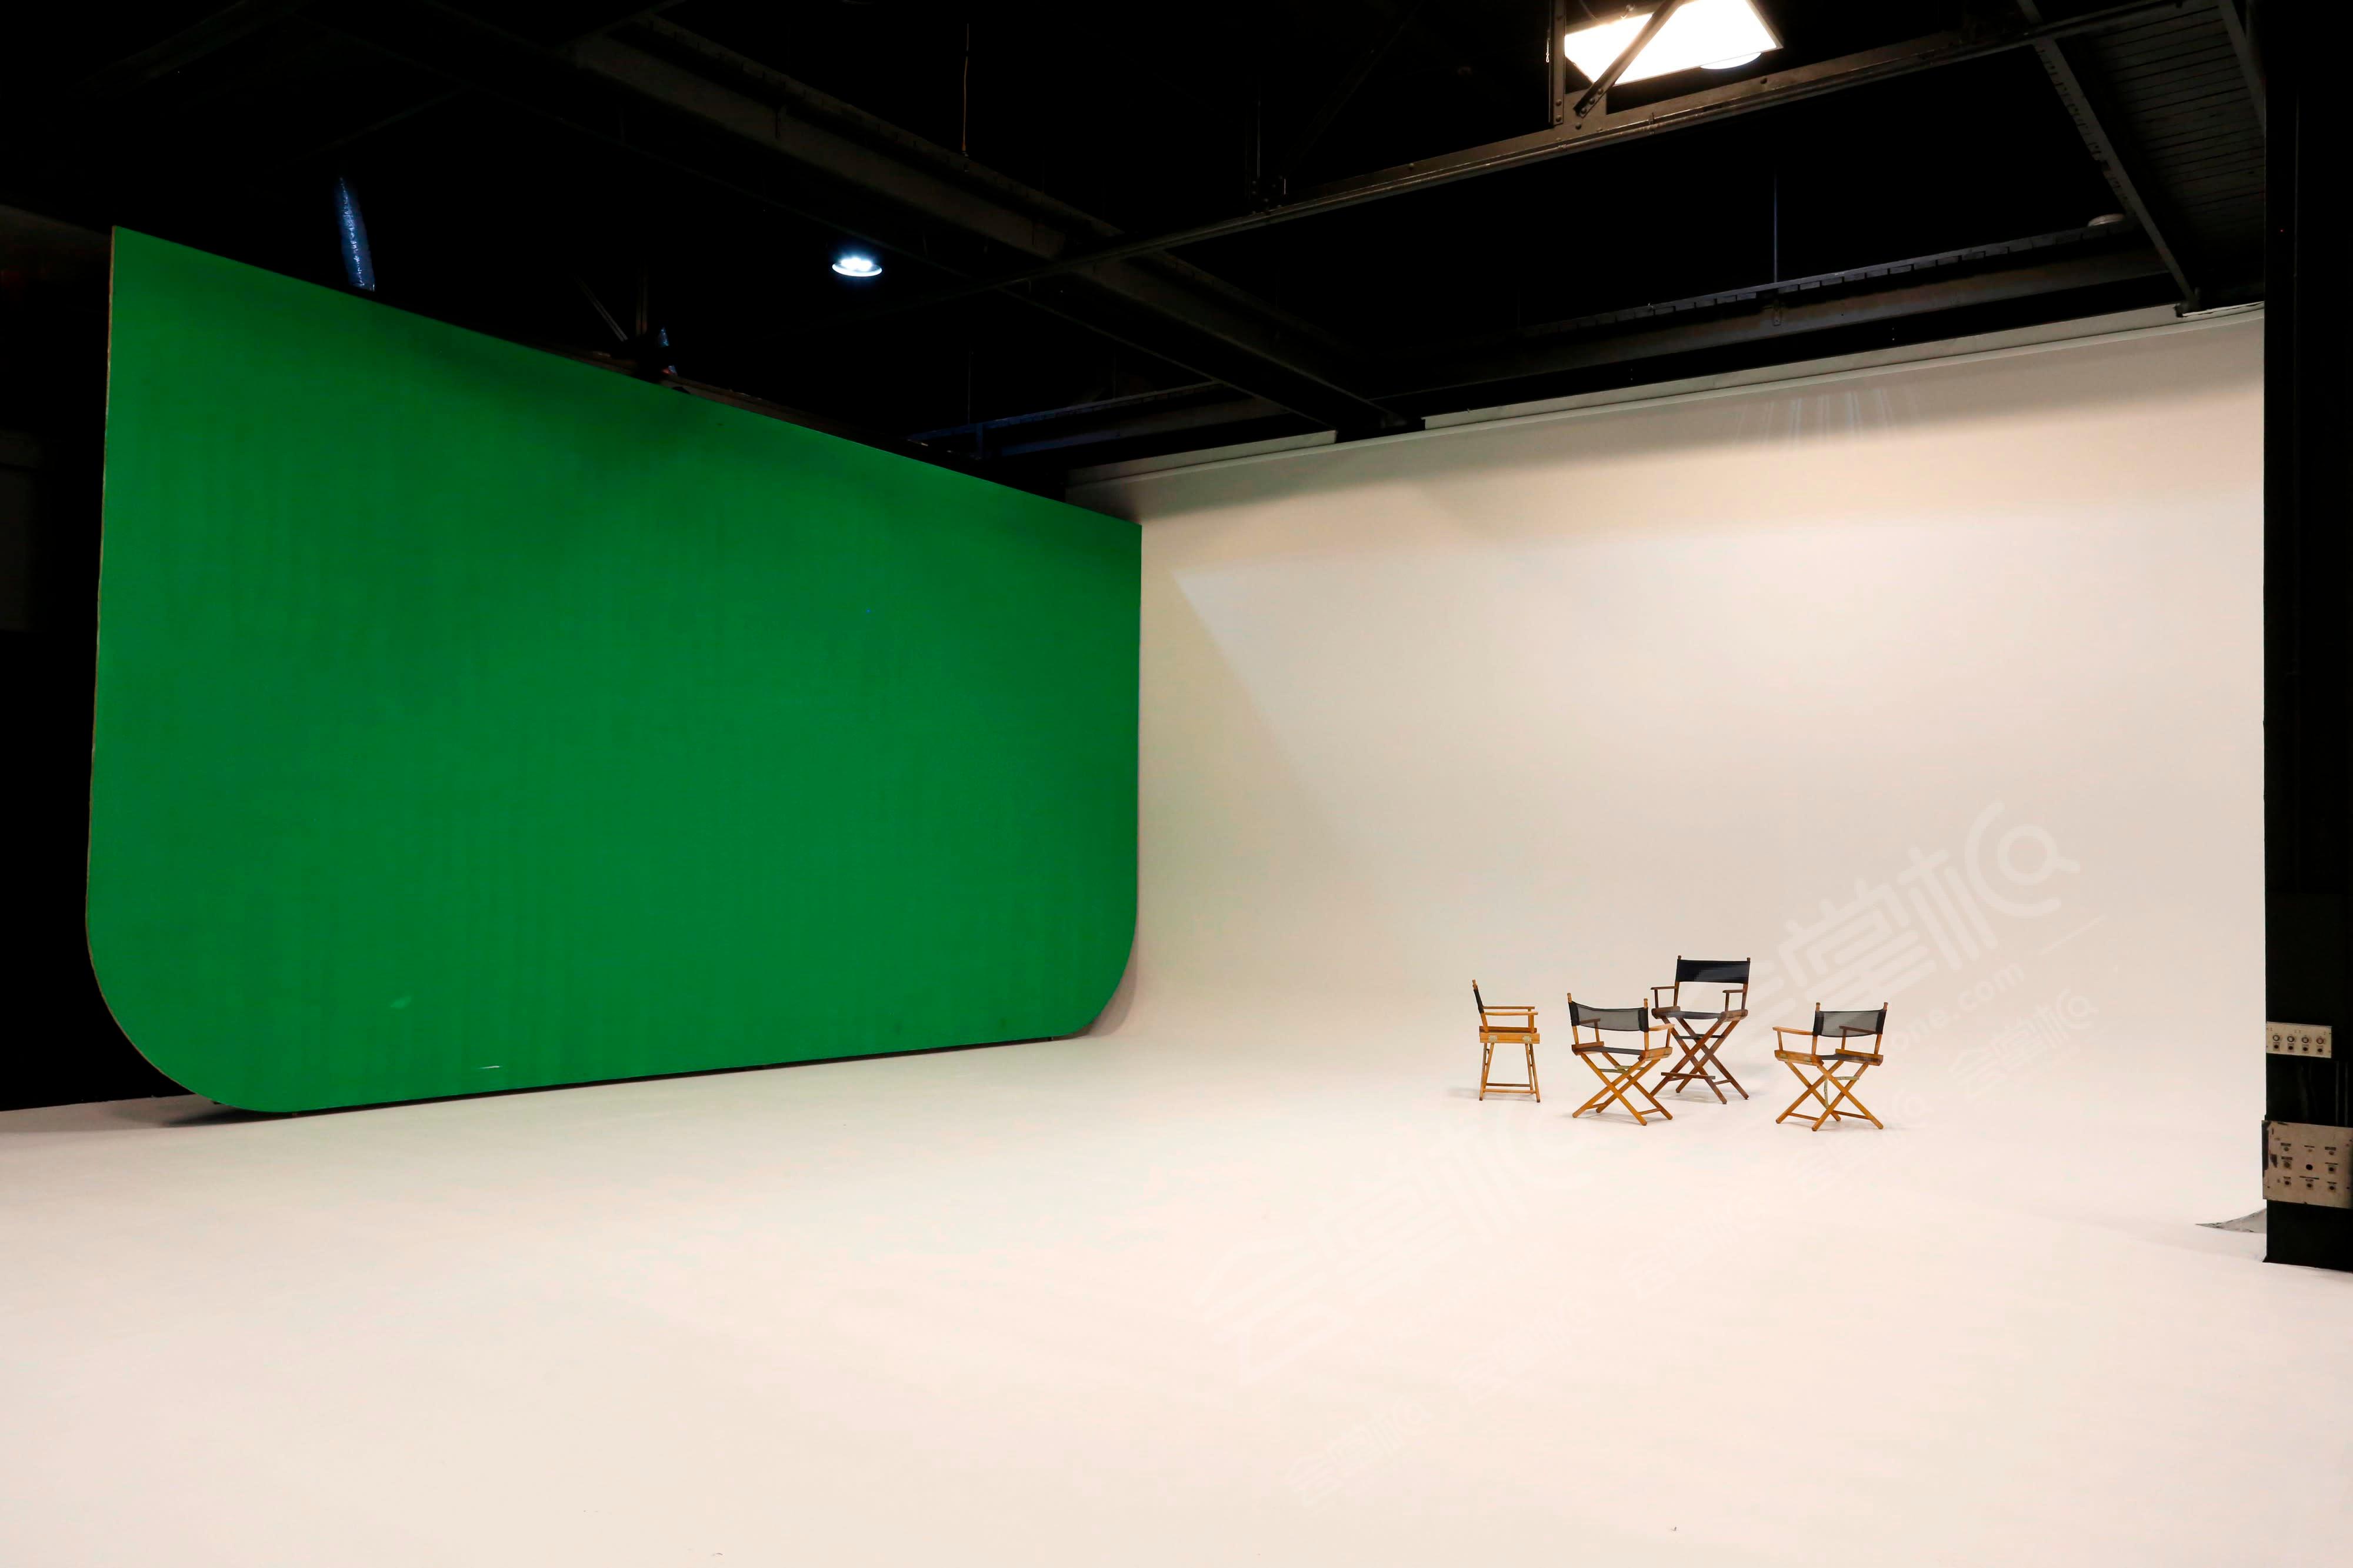 5,000 sf Historic Detroit Film Stage with 1 Cyclorama, Upper VIP Client Area, Dressing Rooms